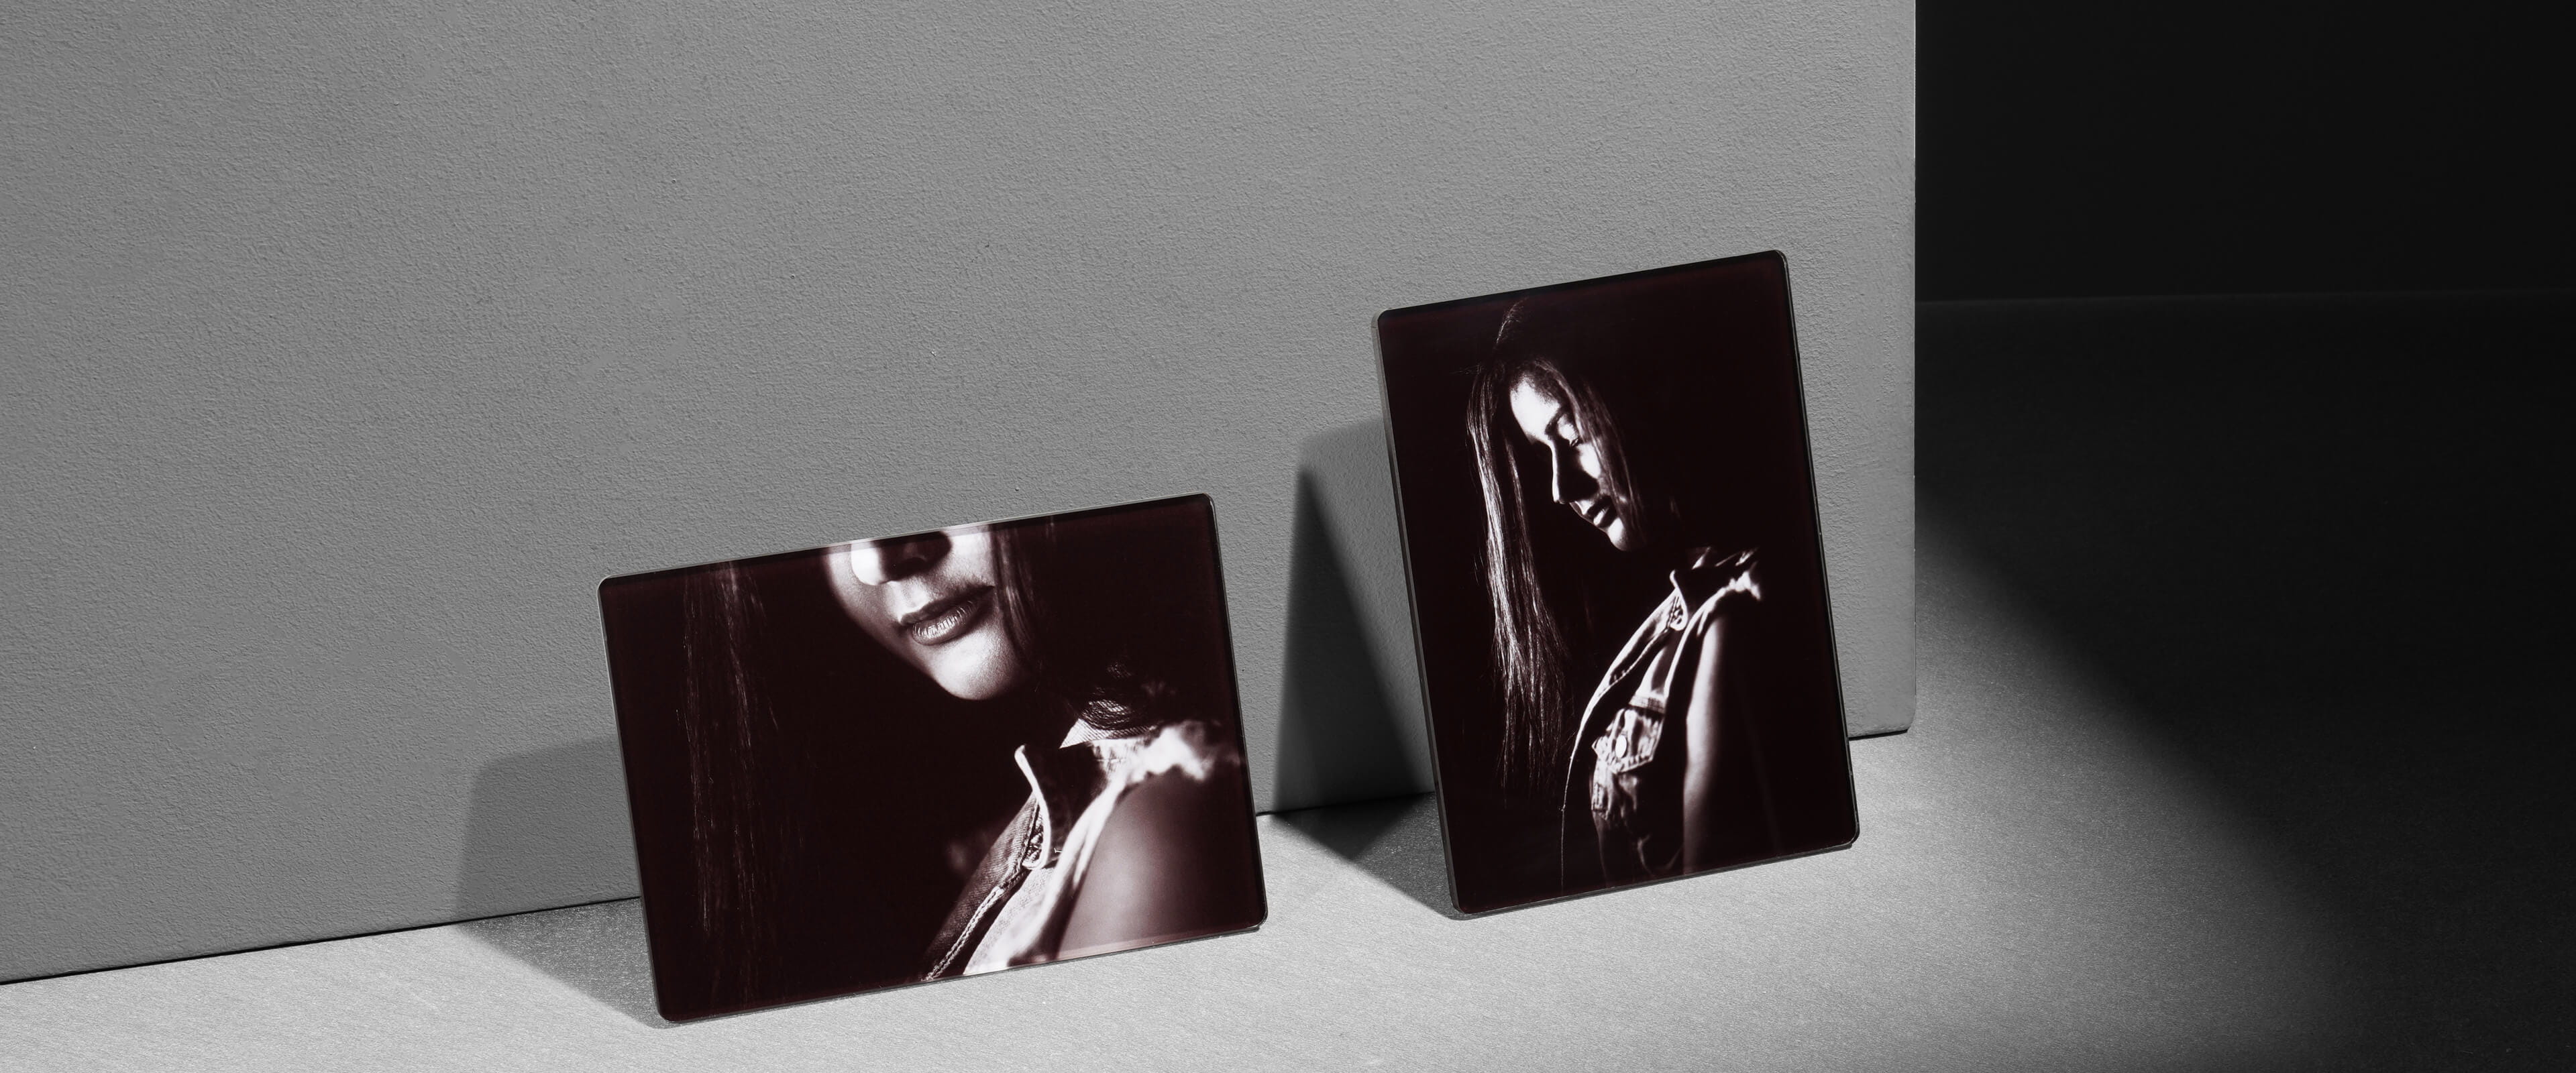 two acrylic photo plaques in different orientations standing on a white table showing a woman